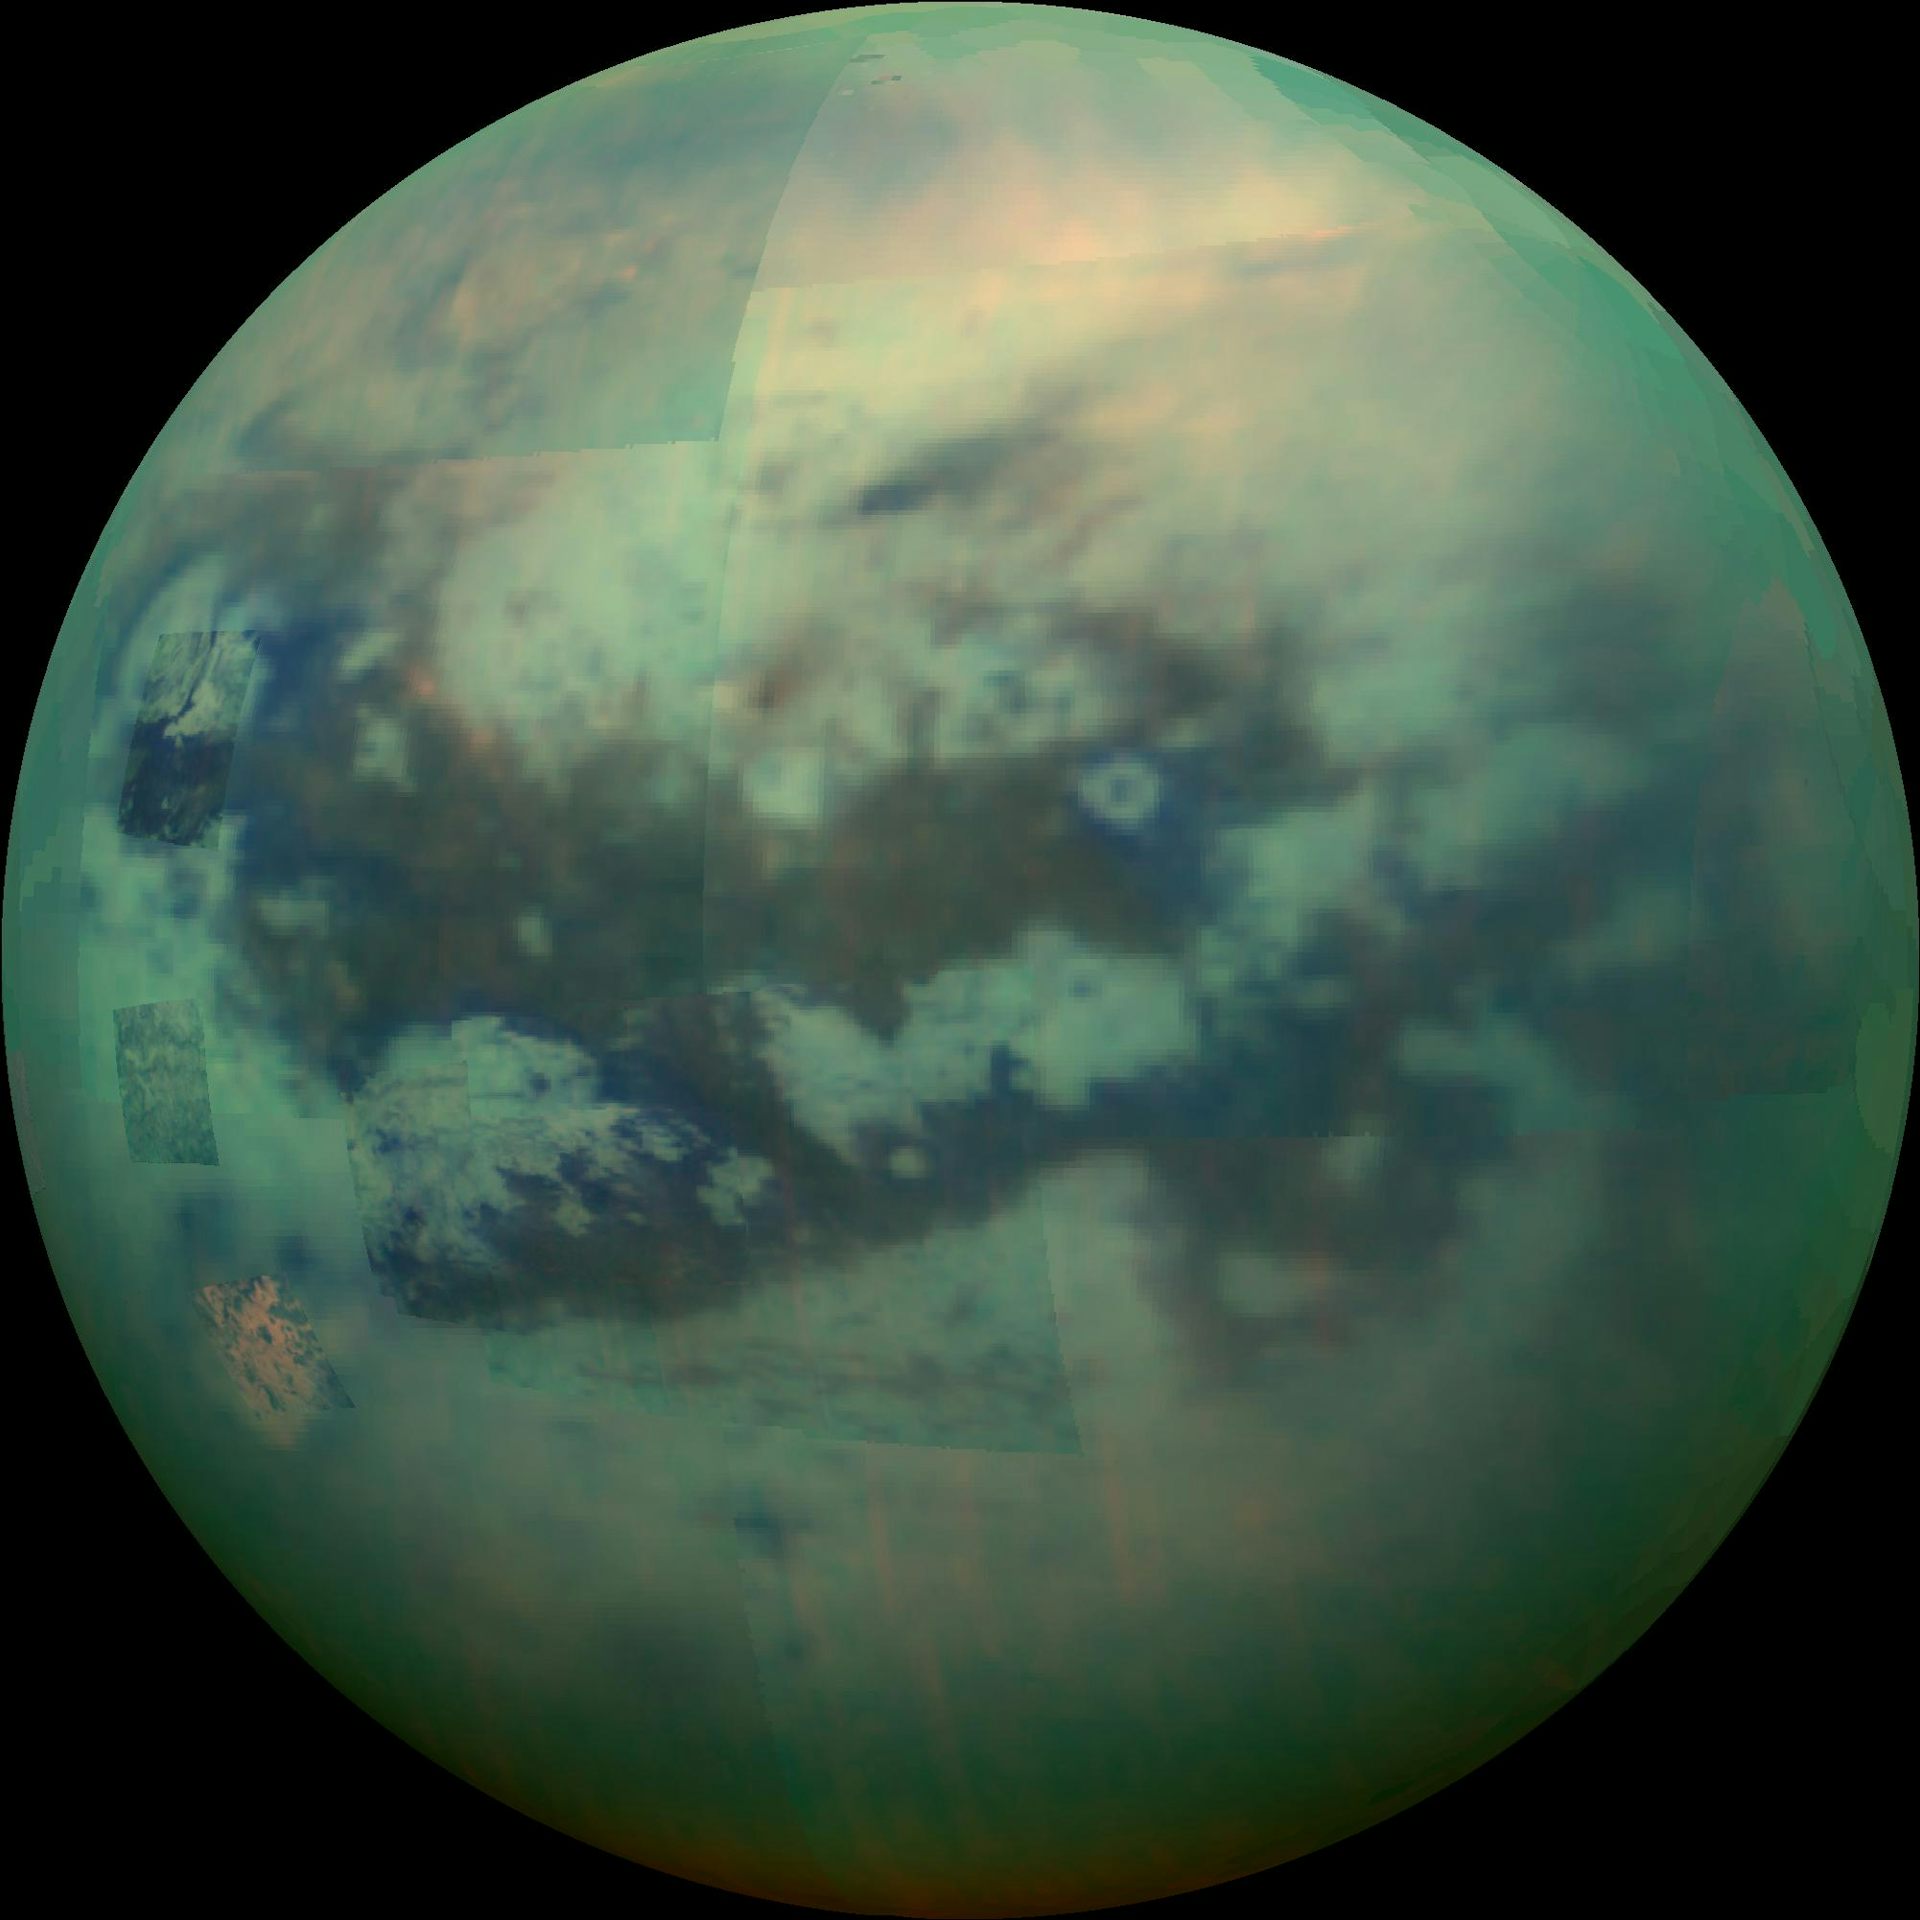 Details of Titan's surface from infrared imaging